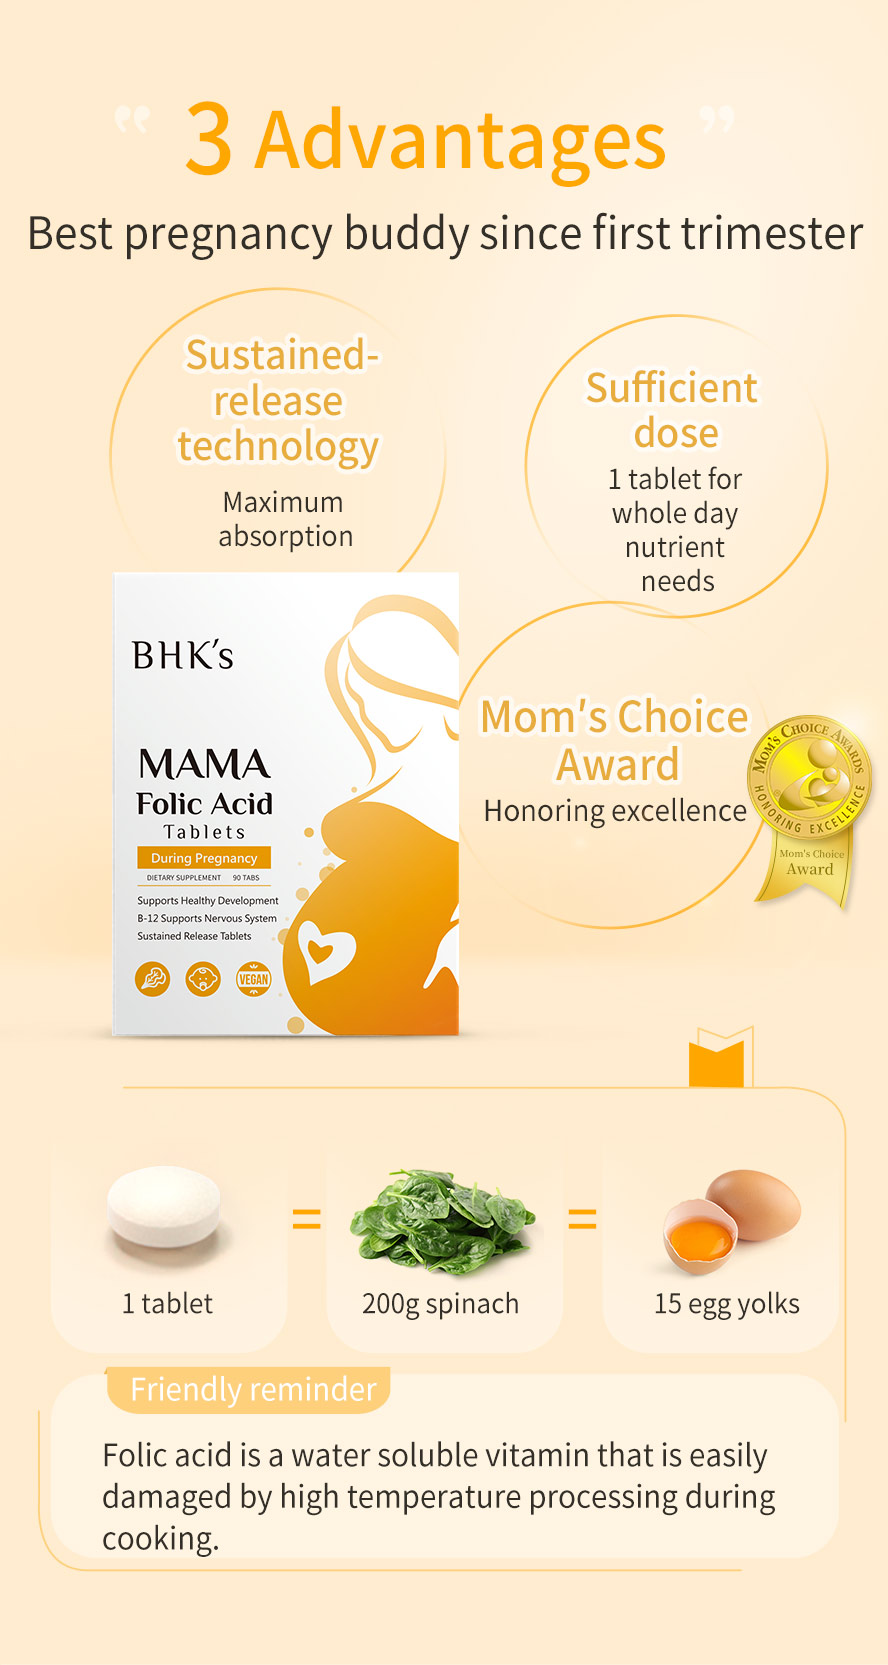 Internationally folic acid supplement, suffient dosage to fulfill folic acid nutrient requirements, with exclusive sustained release technology tablet to enhance absorption